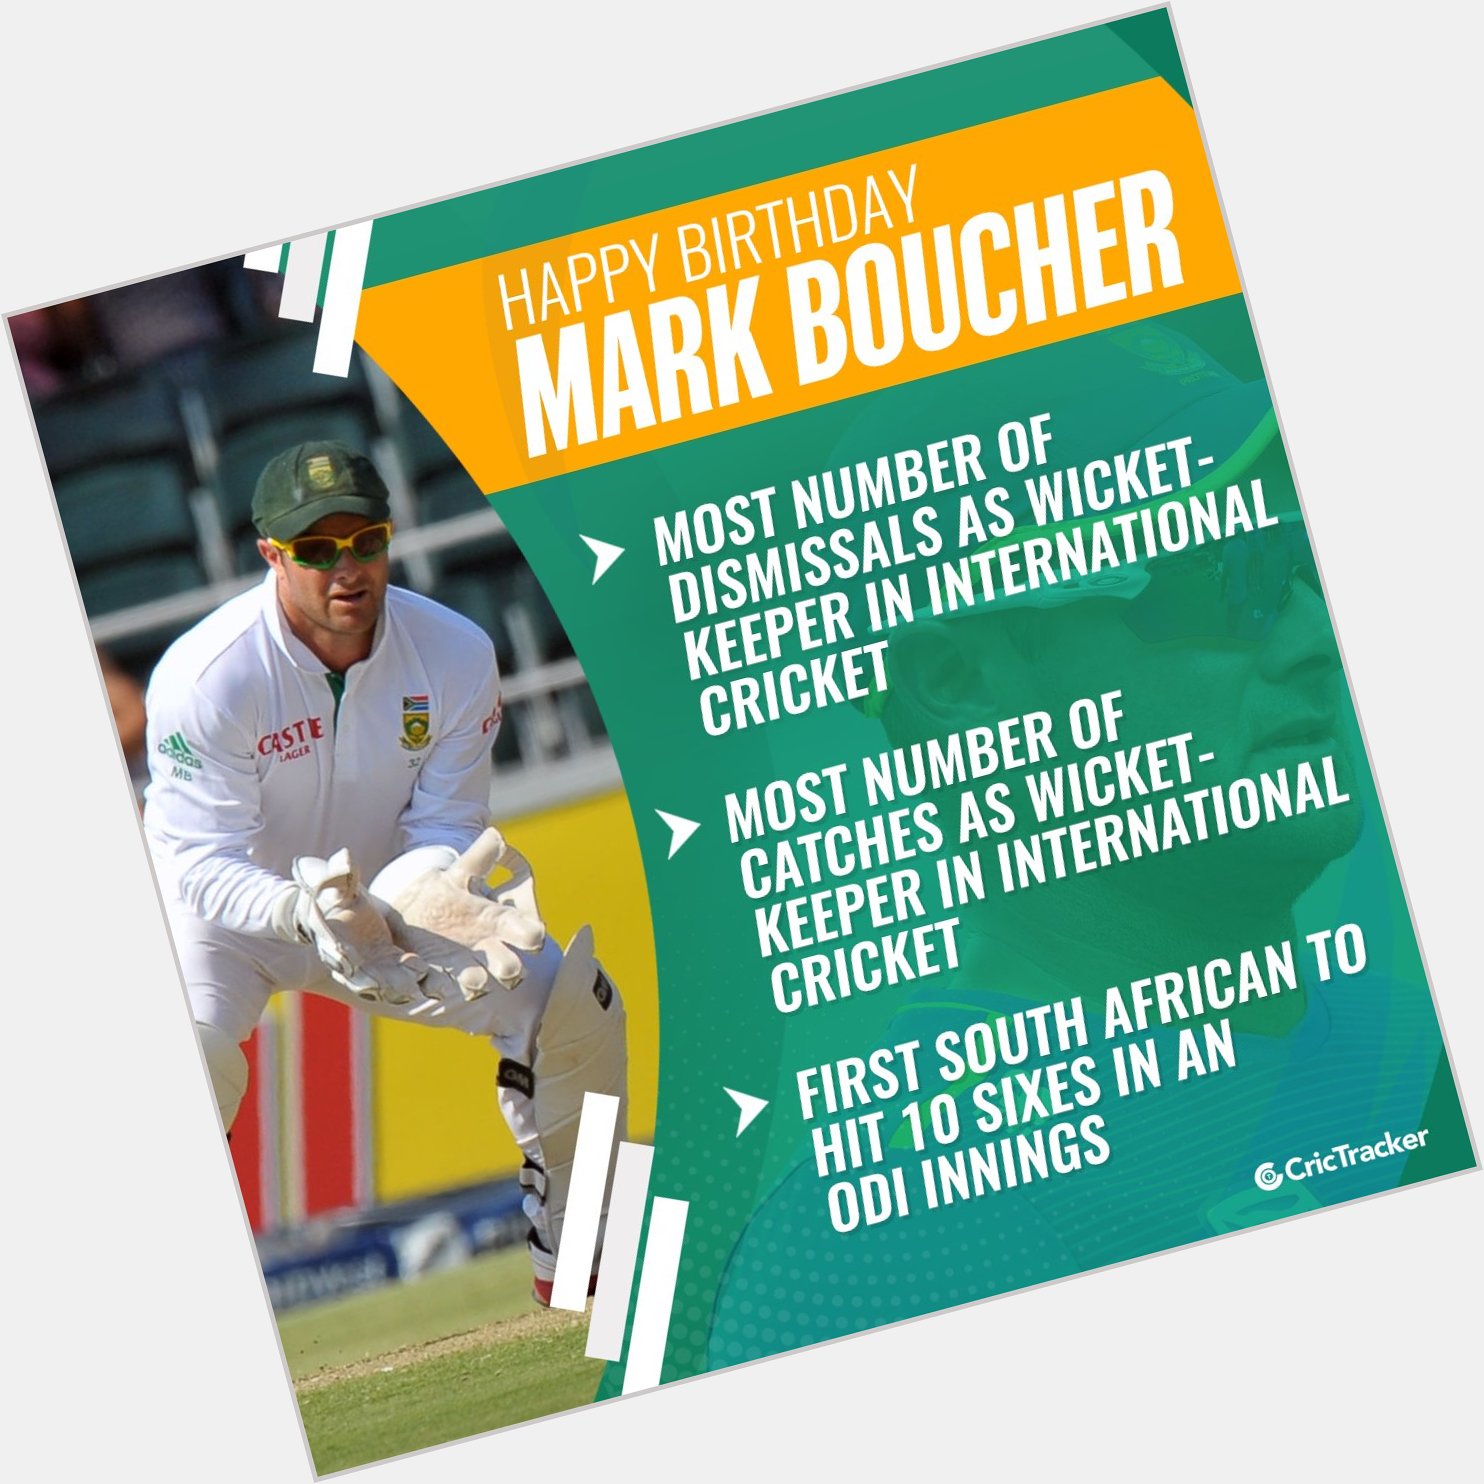 Wishing former South African cricketer Mark Boucher a very happy birthday.    